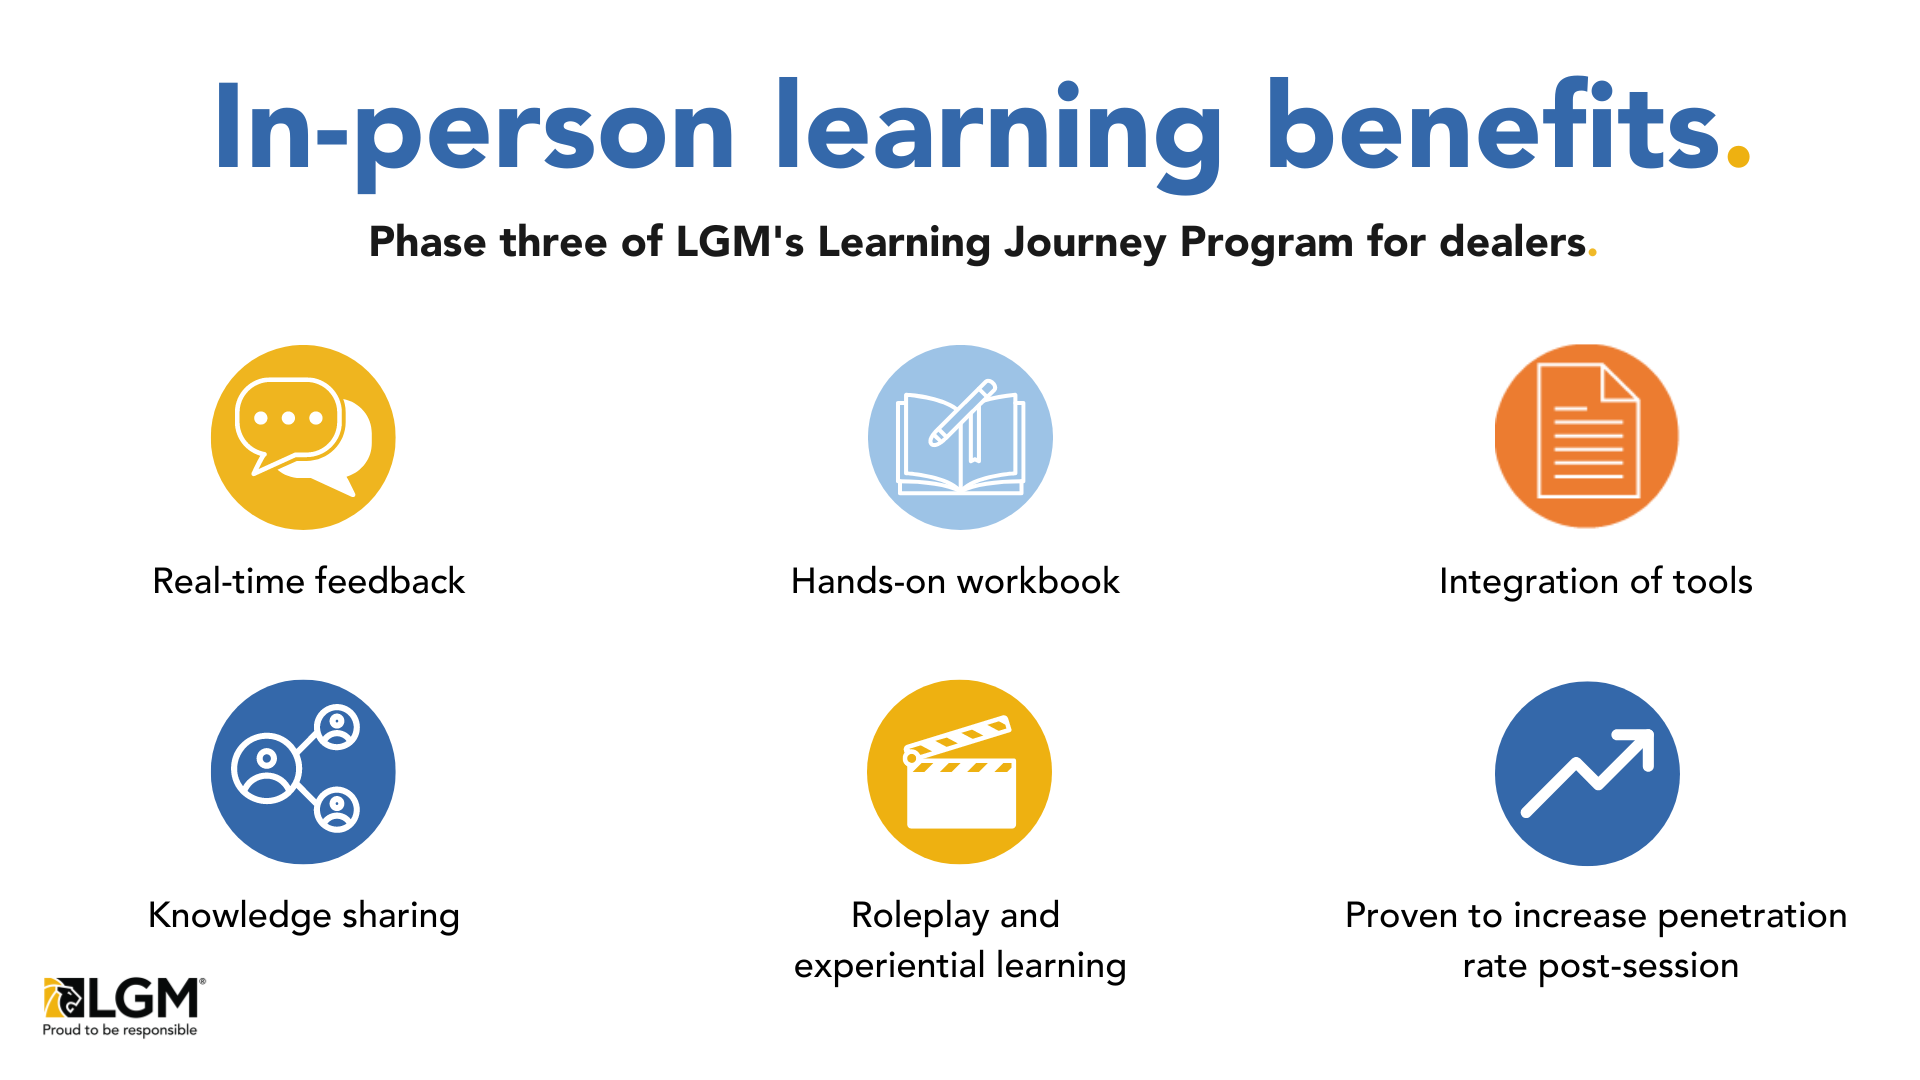 Benefits of LGM's in-person phase 3 learning journey includes: real-time feedback, hands-on workbook, integration of tools, knowledge sharing, roleplay and experiential learning, and proven to increase penetration rates pos-session.